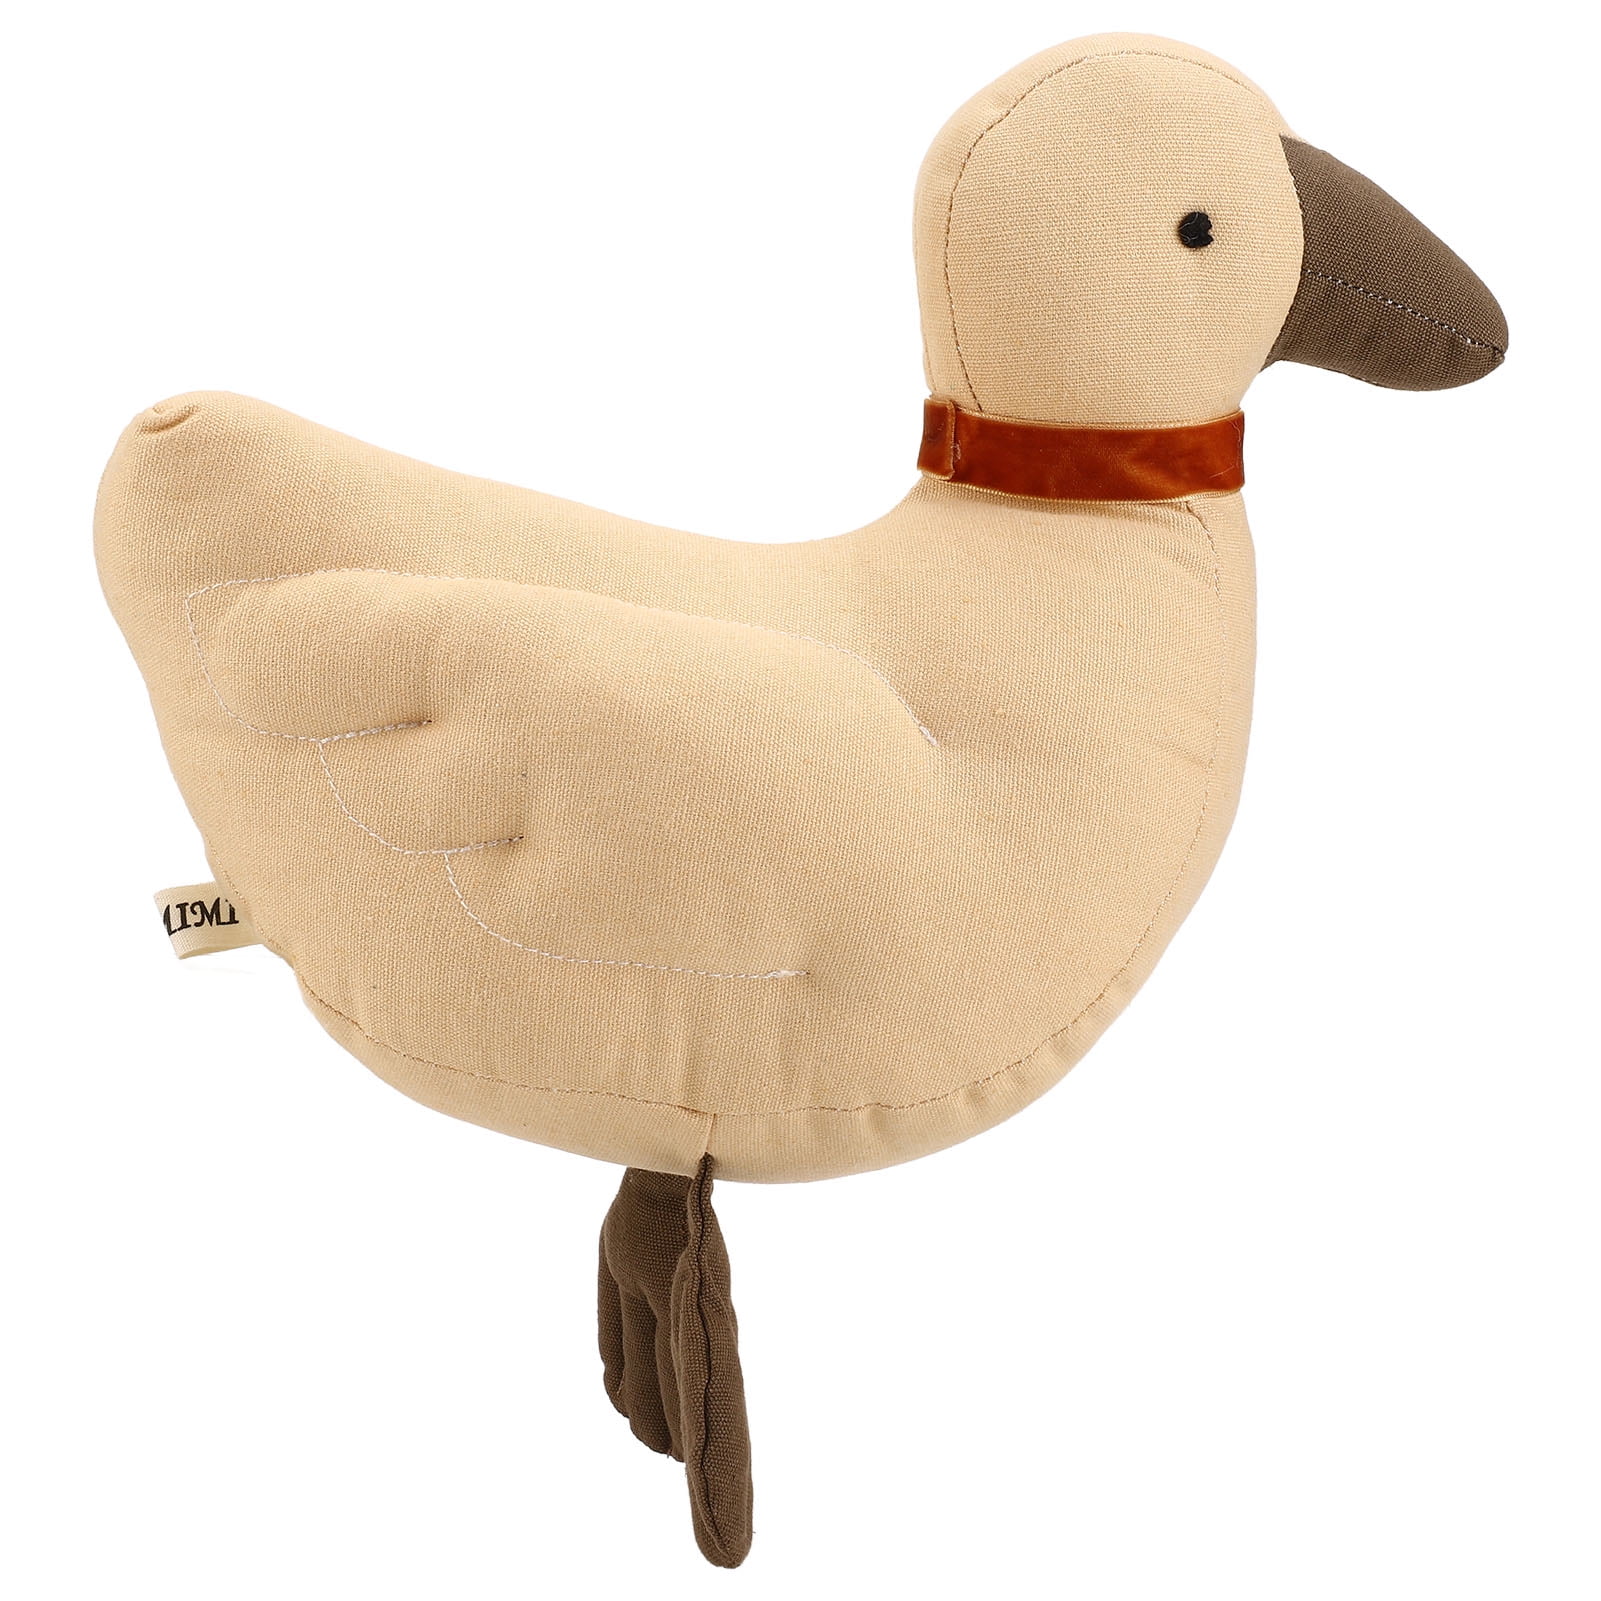 Duck Cotton Pillow Toy, Hug Soft Stuffed Animal Duck Cotton Toy Cute For  Bedroom Brown | Walmart Canada